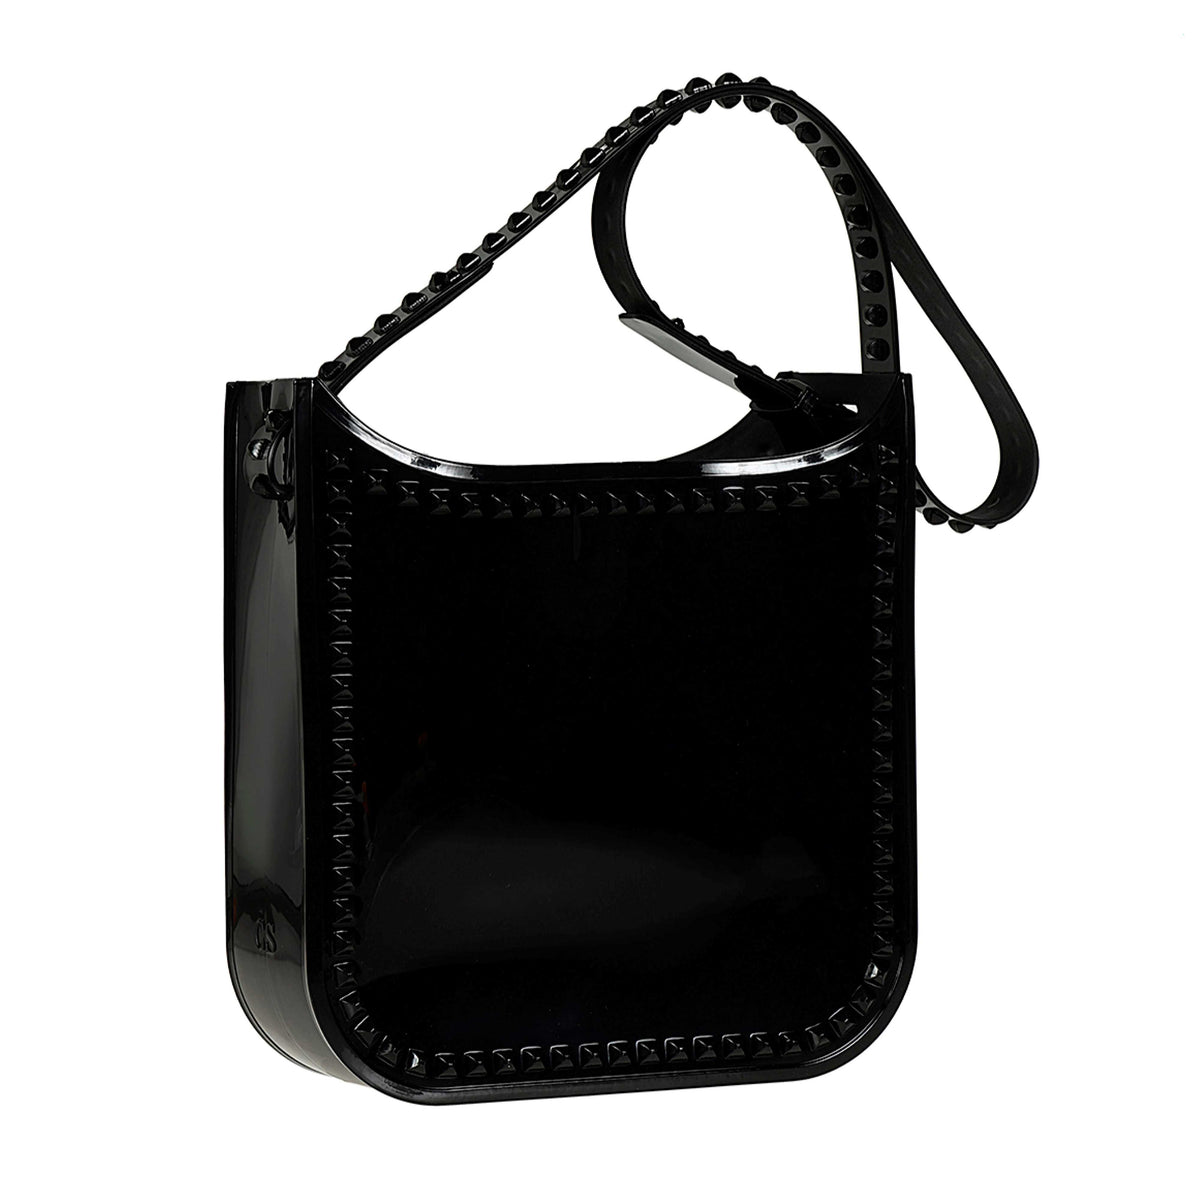 Black large tote bags for women from Carmen Sol